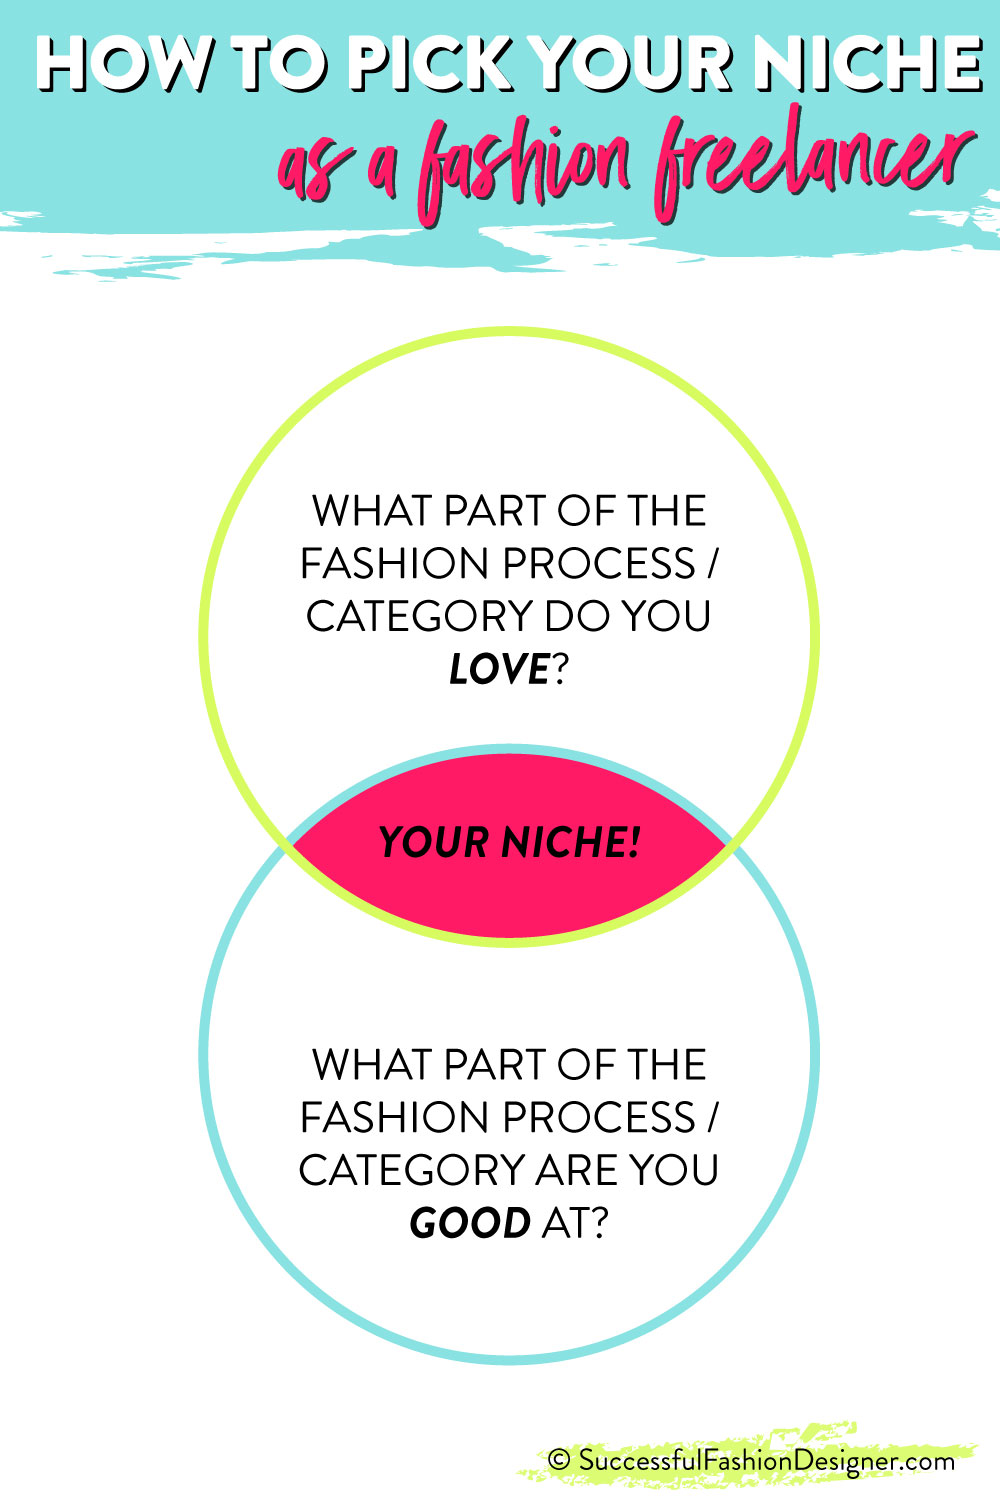 How to pick your niche and services as a freelance fashion designer